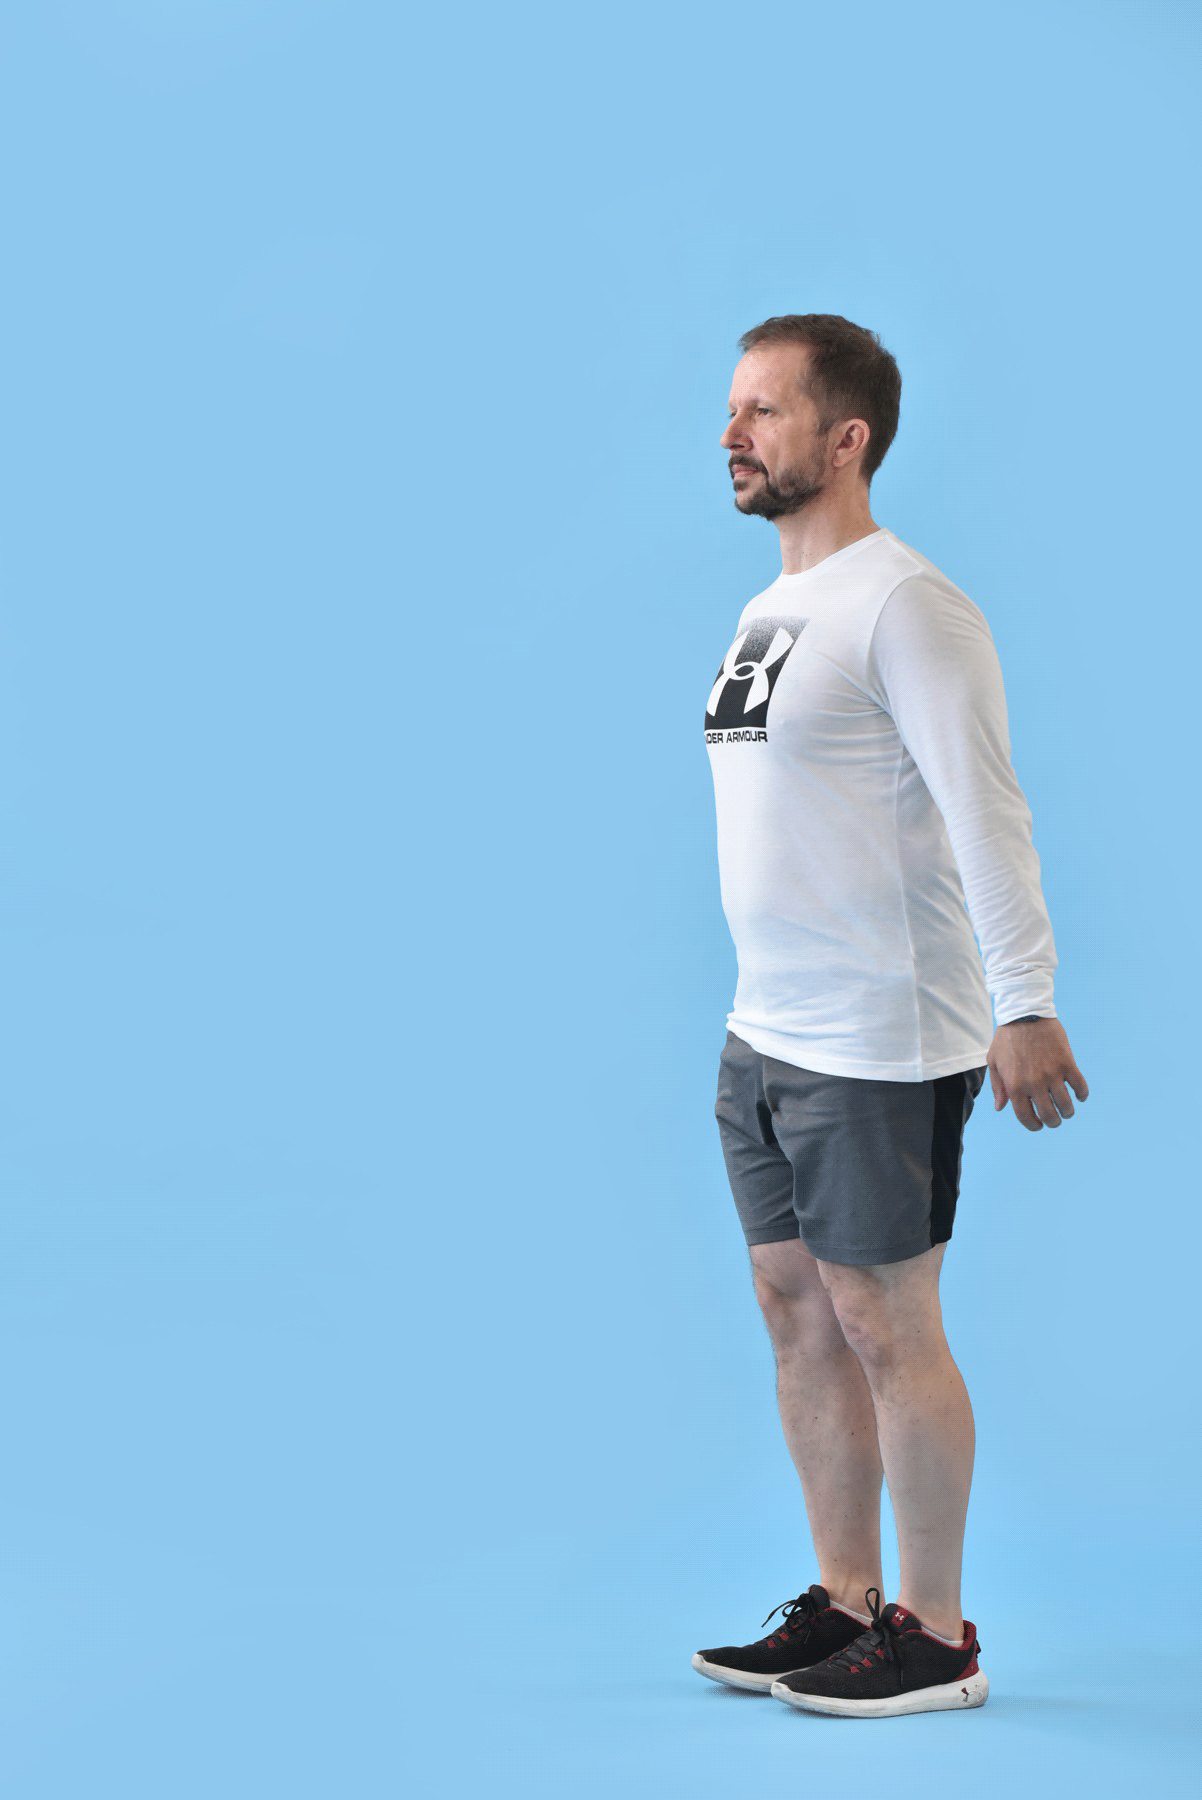 How to do a lunge right